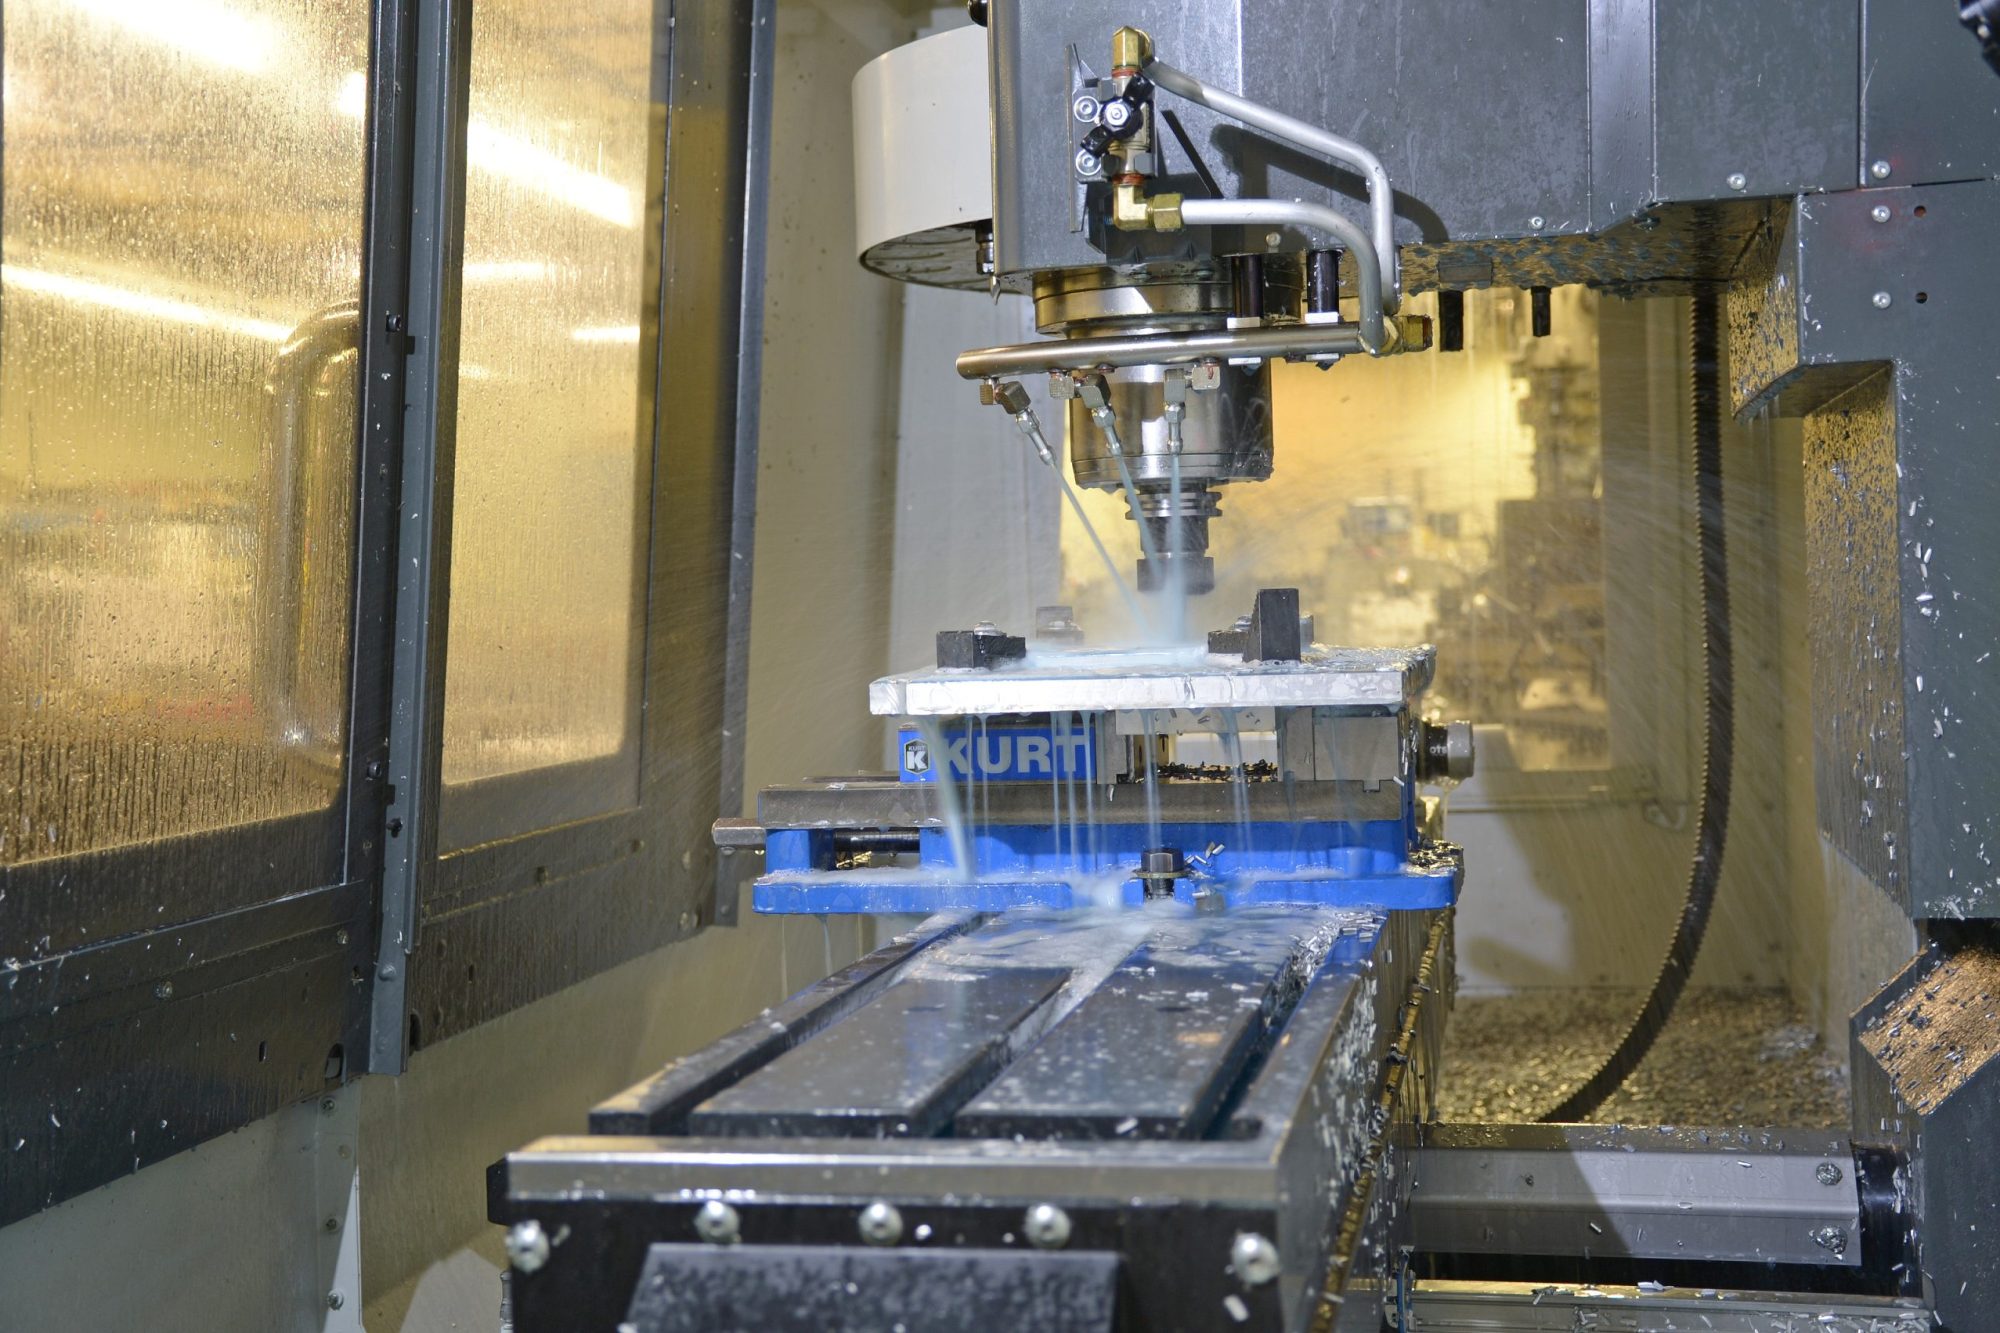 This CNC machine is one of many tools available in the machine shop at the University of Missouri Research Reactor (MURR).